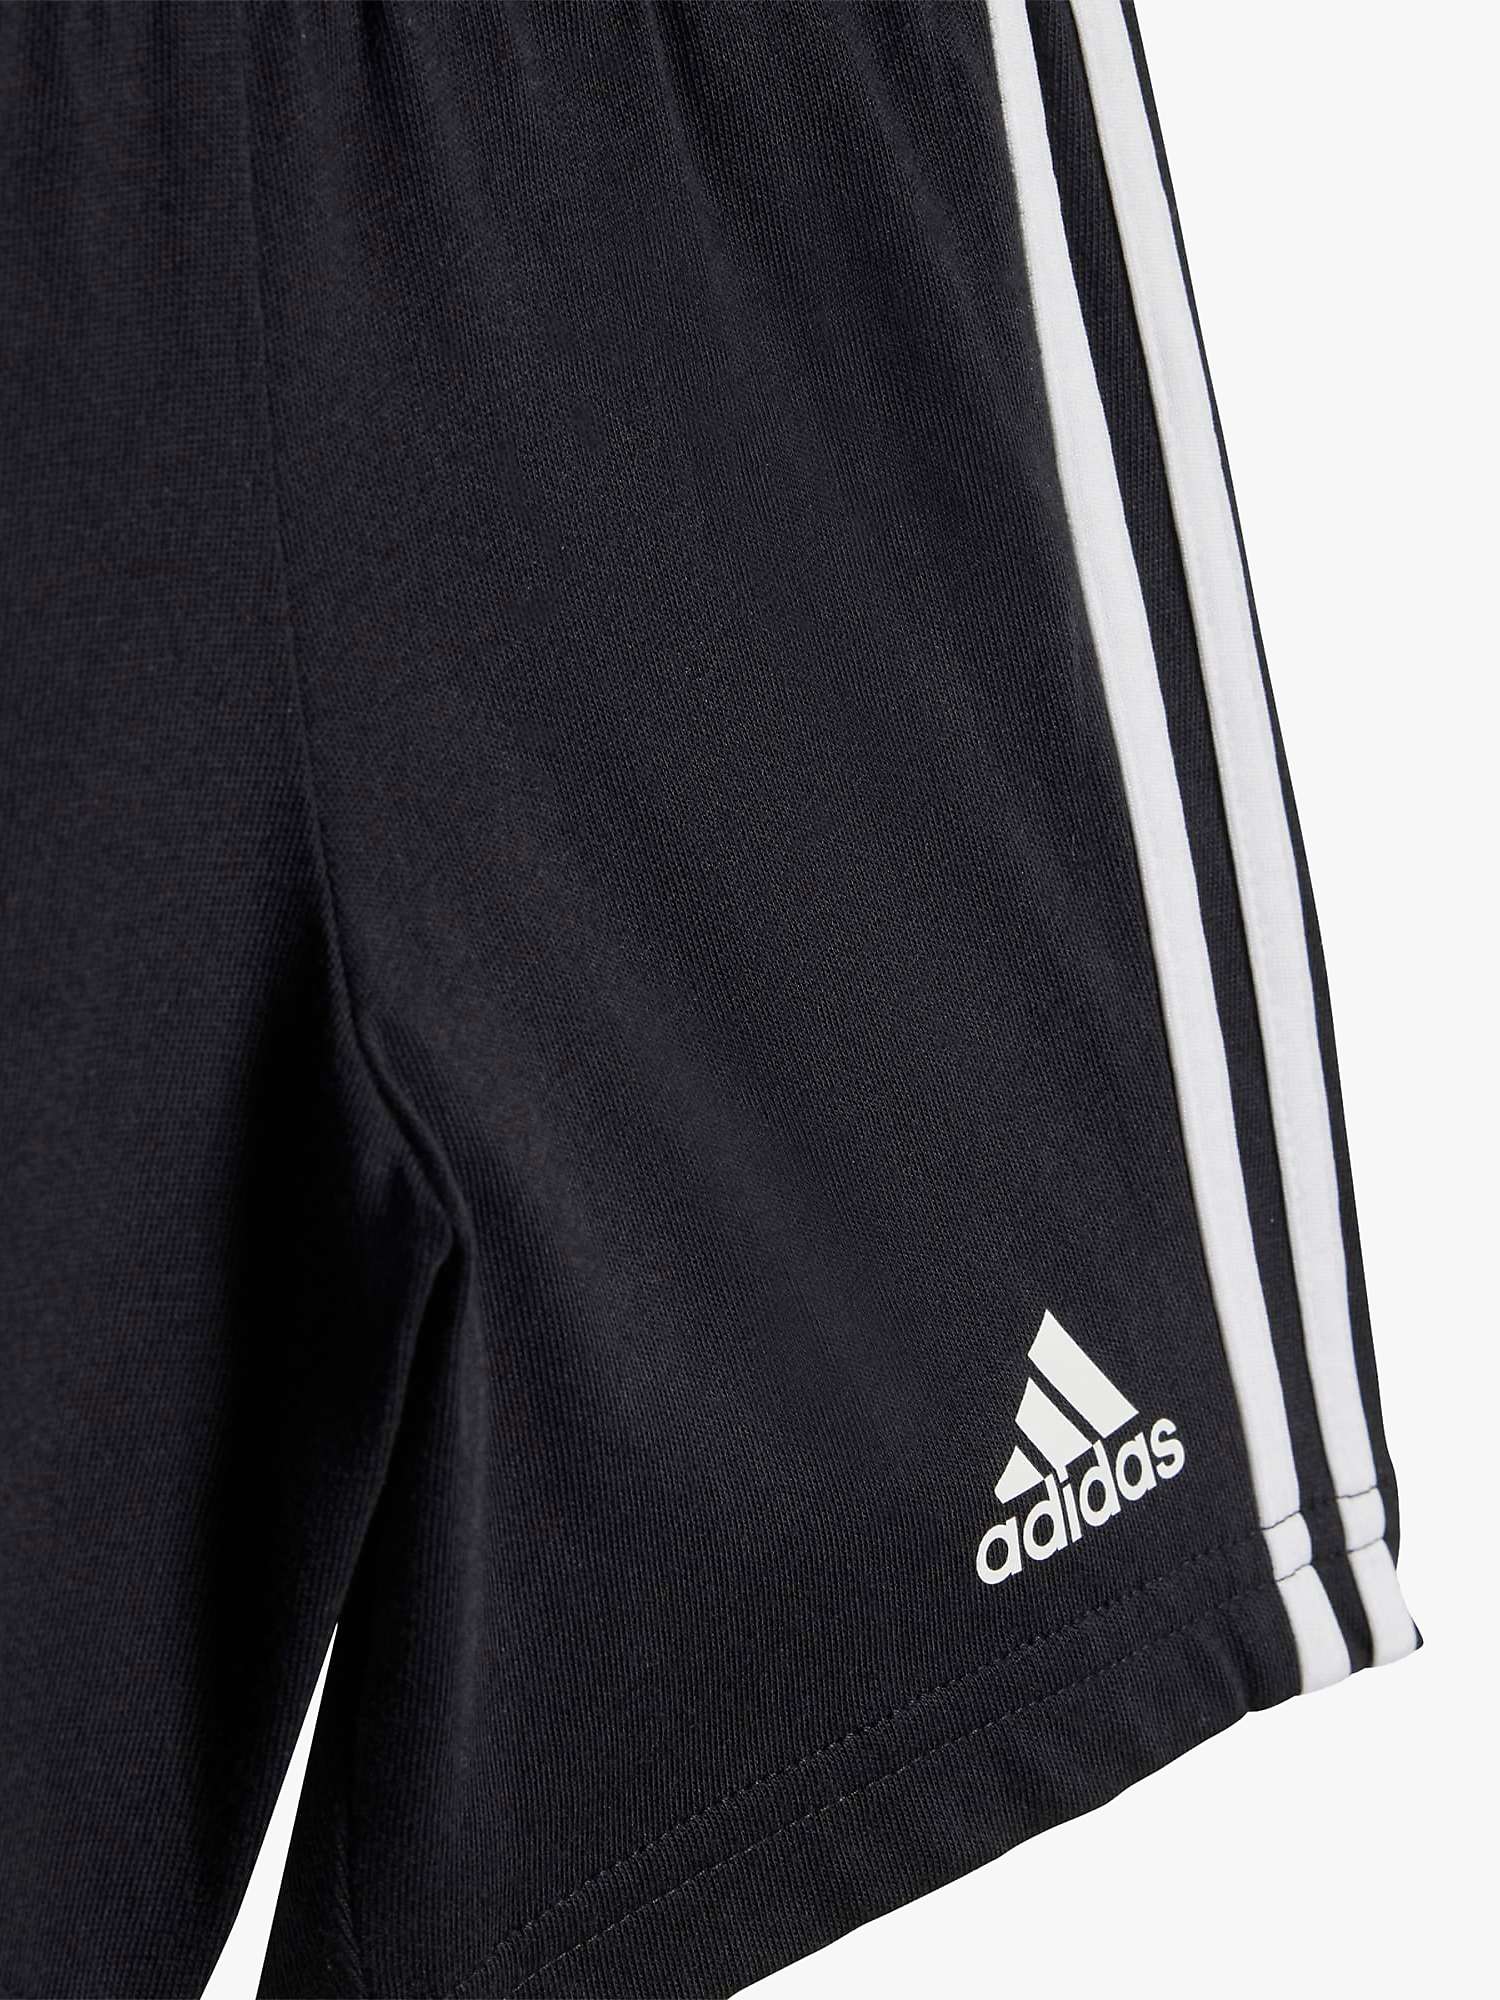 Buy adidas Baby Essentials Sport T-Shirt & Shorts Set, Selubl/White Online at johnlewis.com